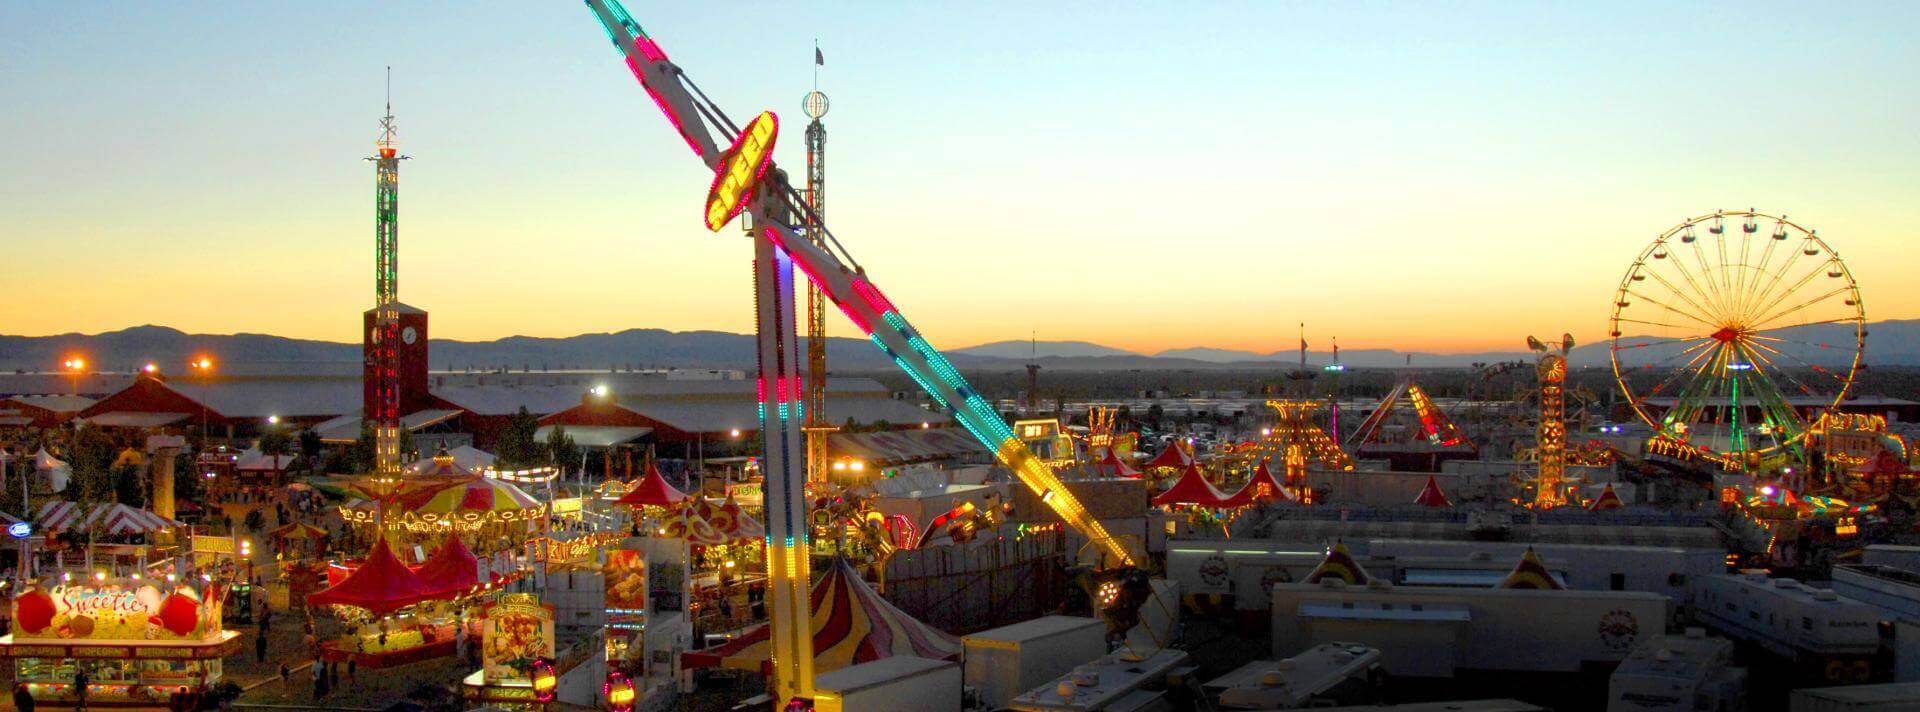 Antelope Valley Fair, Lancaster, CA, 8/168/25 Go Country Events